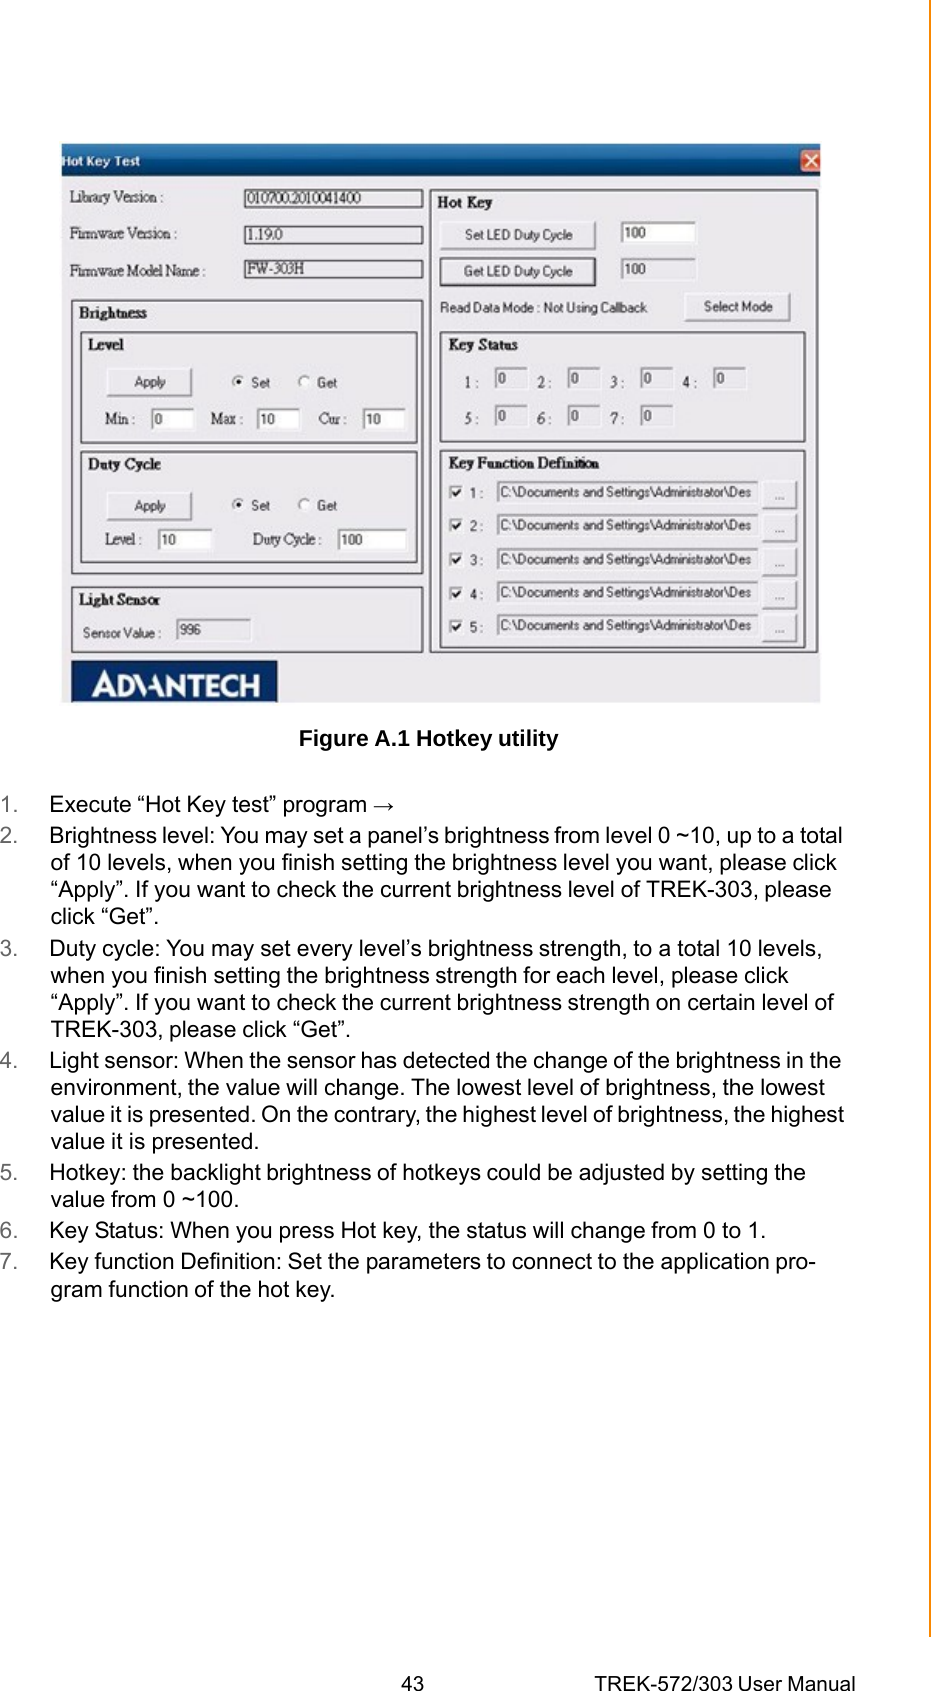 43 TREK-572/303 User ManualAppendix A TREK-303 Figure A.1 Hotkey utility 1.  Execute “Hot Key test” program → 2.  Brightness level: You may set a panel’s brightness from level 0 ~10, up to a total of 10 levels, when you finish setting the brightness level you want, please click “Apply”. If you want to check the current brightness level of TREK-303, please click “Get”. 3.  Duty cycle: You may set every level’s brightness strength, to a total 10 levels, when you finish setting the brightness strength for each level, please click “Apply”. If you want to check the current brightness strength on certain level of TREK-303, please click “Get”. 4.  Light sensor: When the sensor has detected the change of the brightness in the environment, the value will change. The lowest level of brightness, the lowest value it is presented. On the contrary, the highest level of brightness, the highest value it is presented. 5.  Hotkey: the backlight brightness of hotkeys could be adjusted by setting the value from 0 ~100. 6.  Key Status: When you press Hot key, the status will change from 0 to 1. 7.  Key function Definition: Set the parameters to connect to the application pro- gram function of the hot key. 